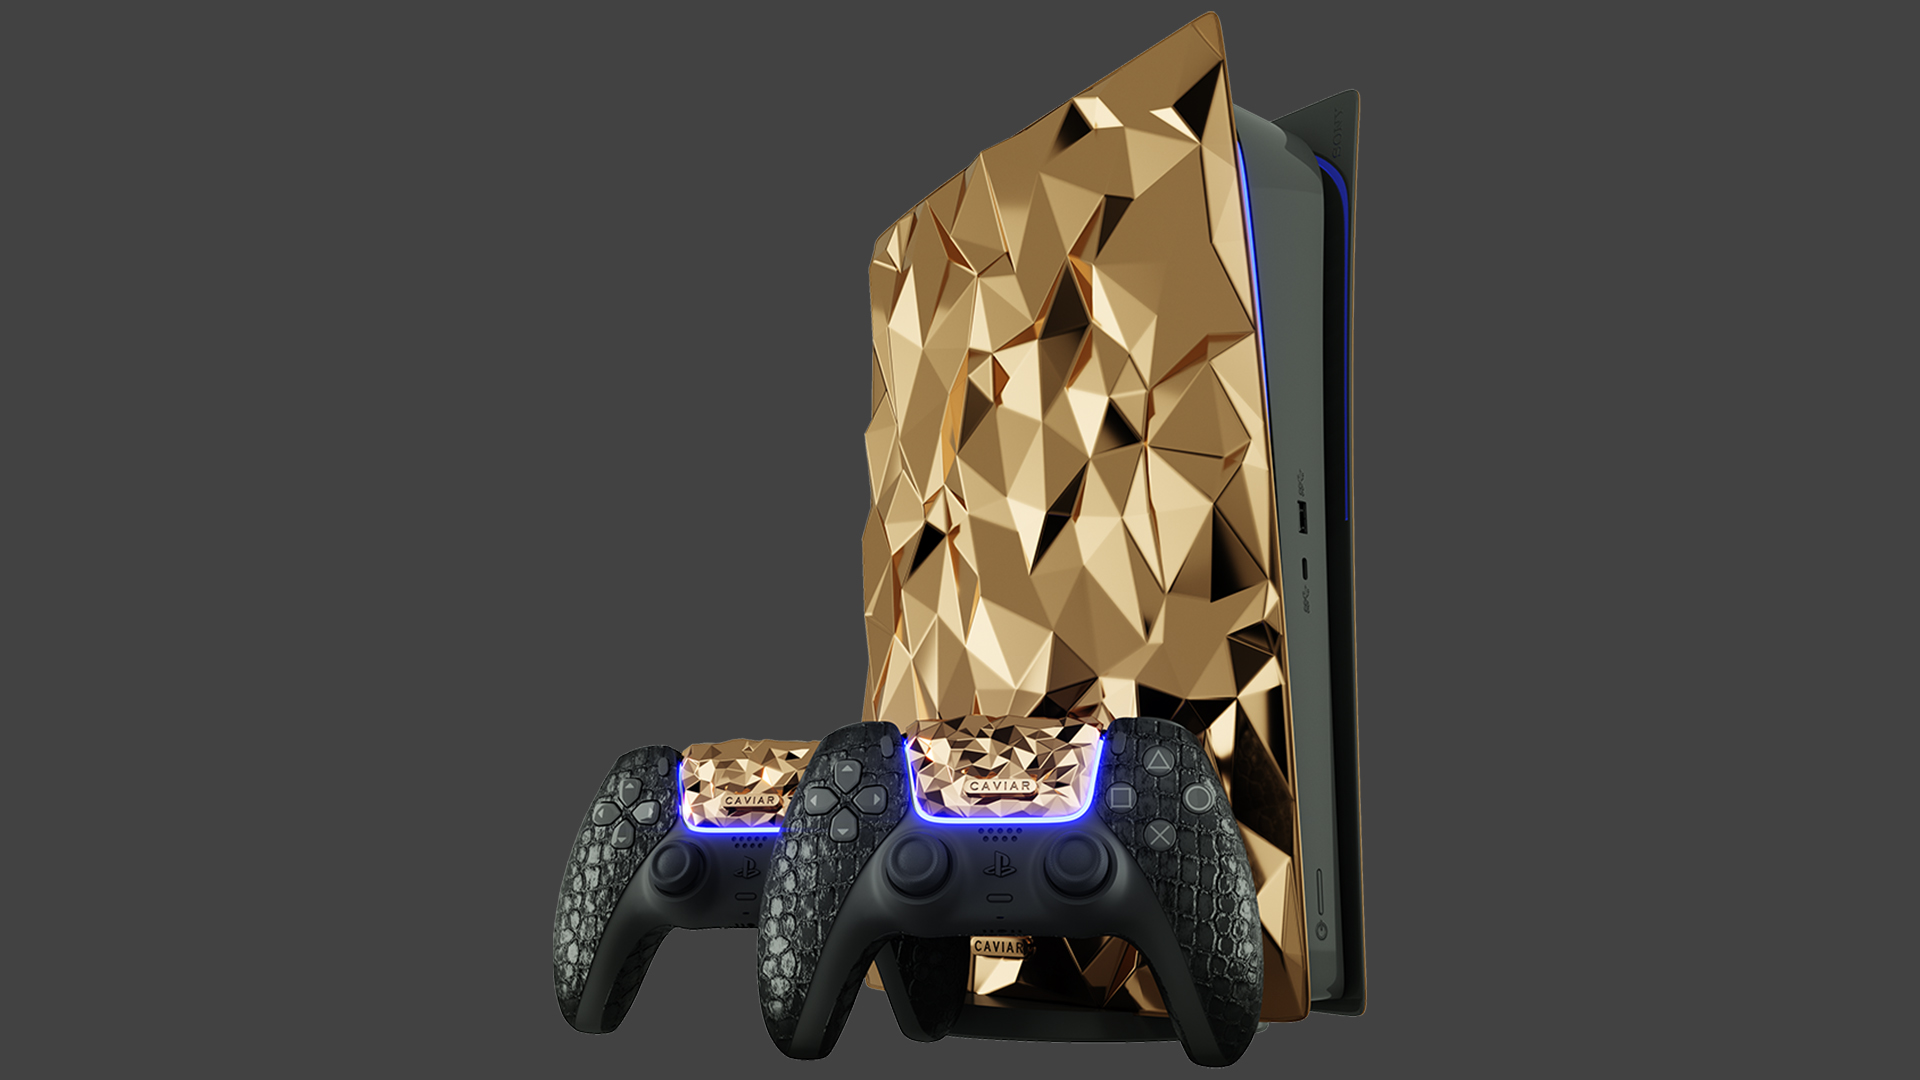 Caviar custom PlayStation 5 will cost $500,000, will be covered